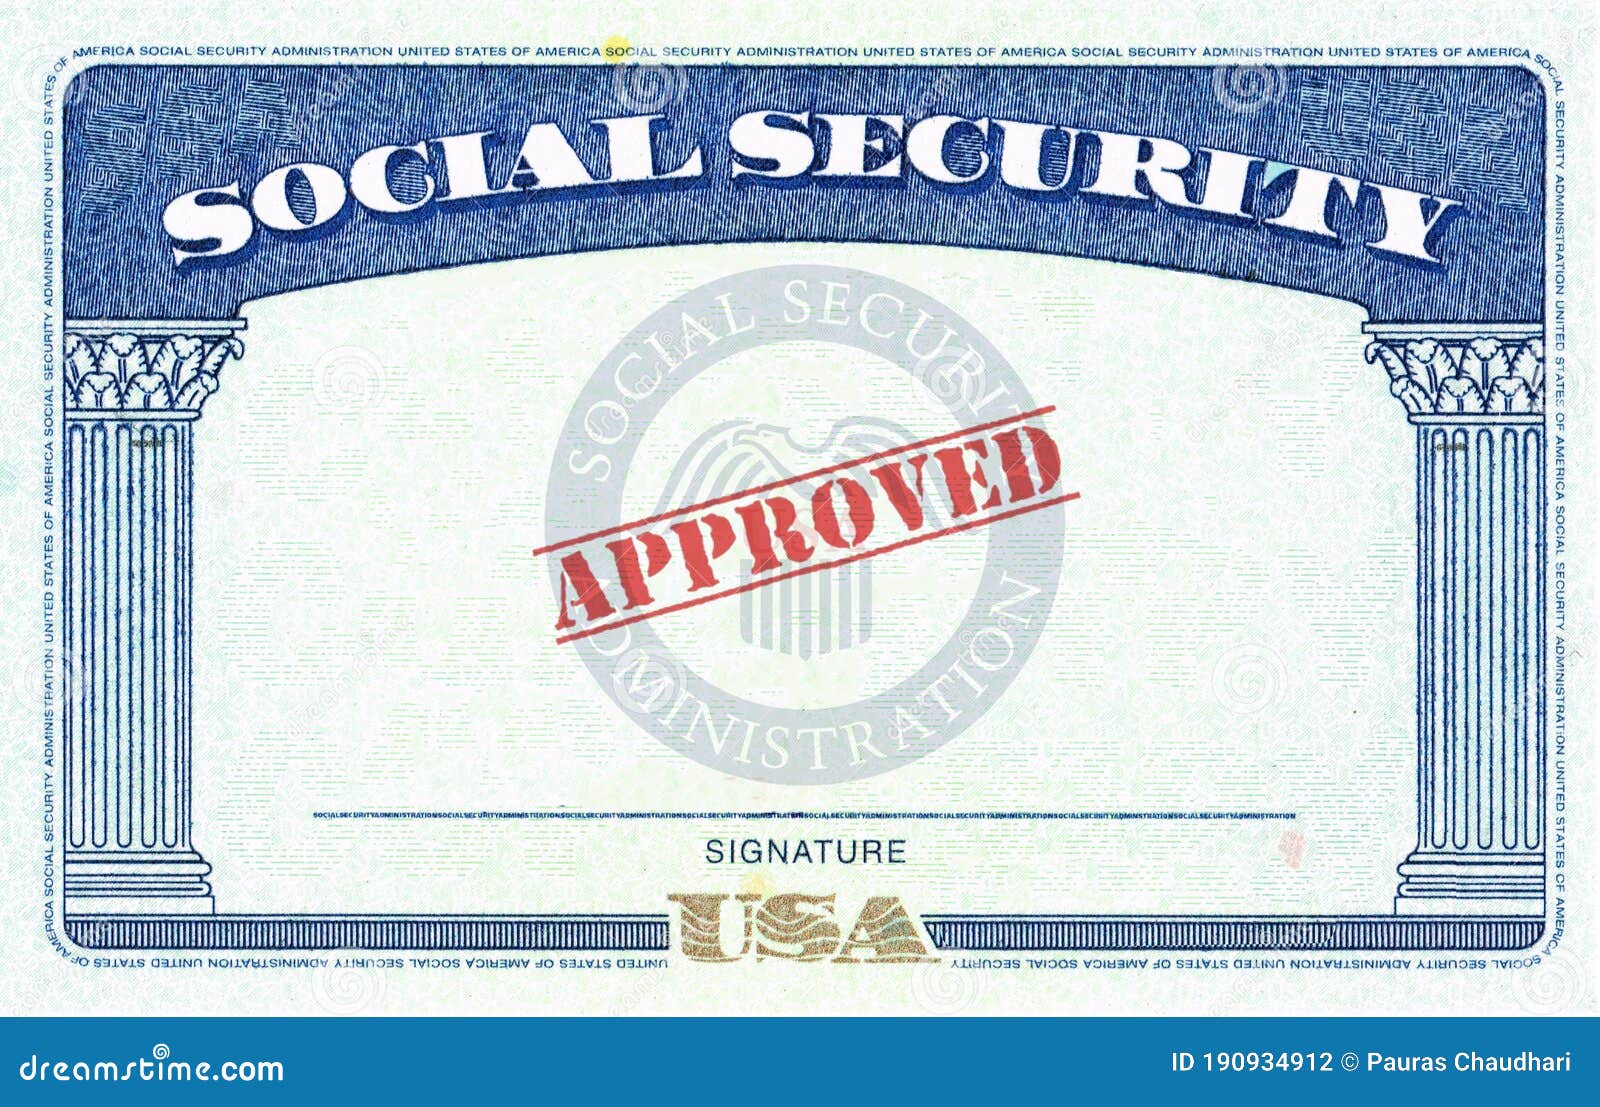 Social Security Card Template Photos - Free & Royalty-Free Stock Intended For Editable Social Security Card Template